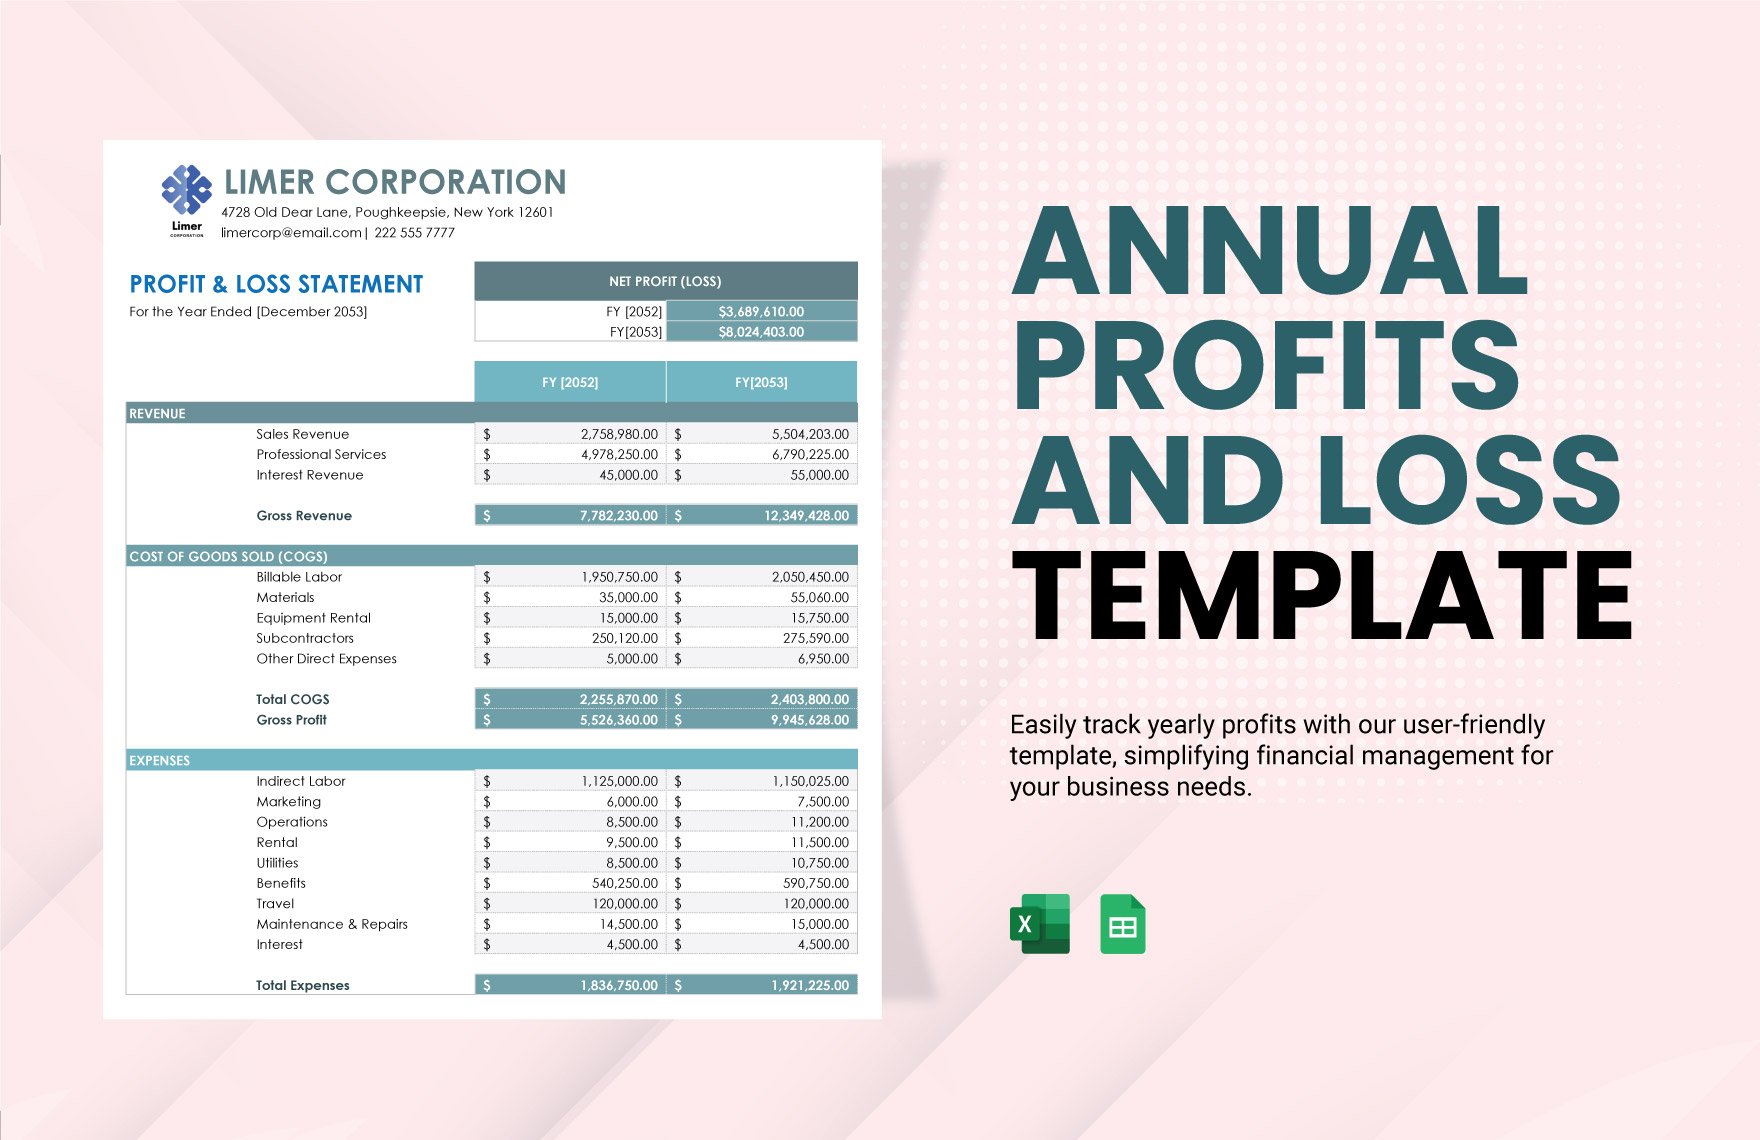 Annual Profits And Loss Templates